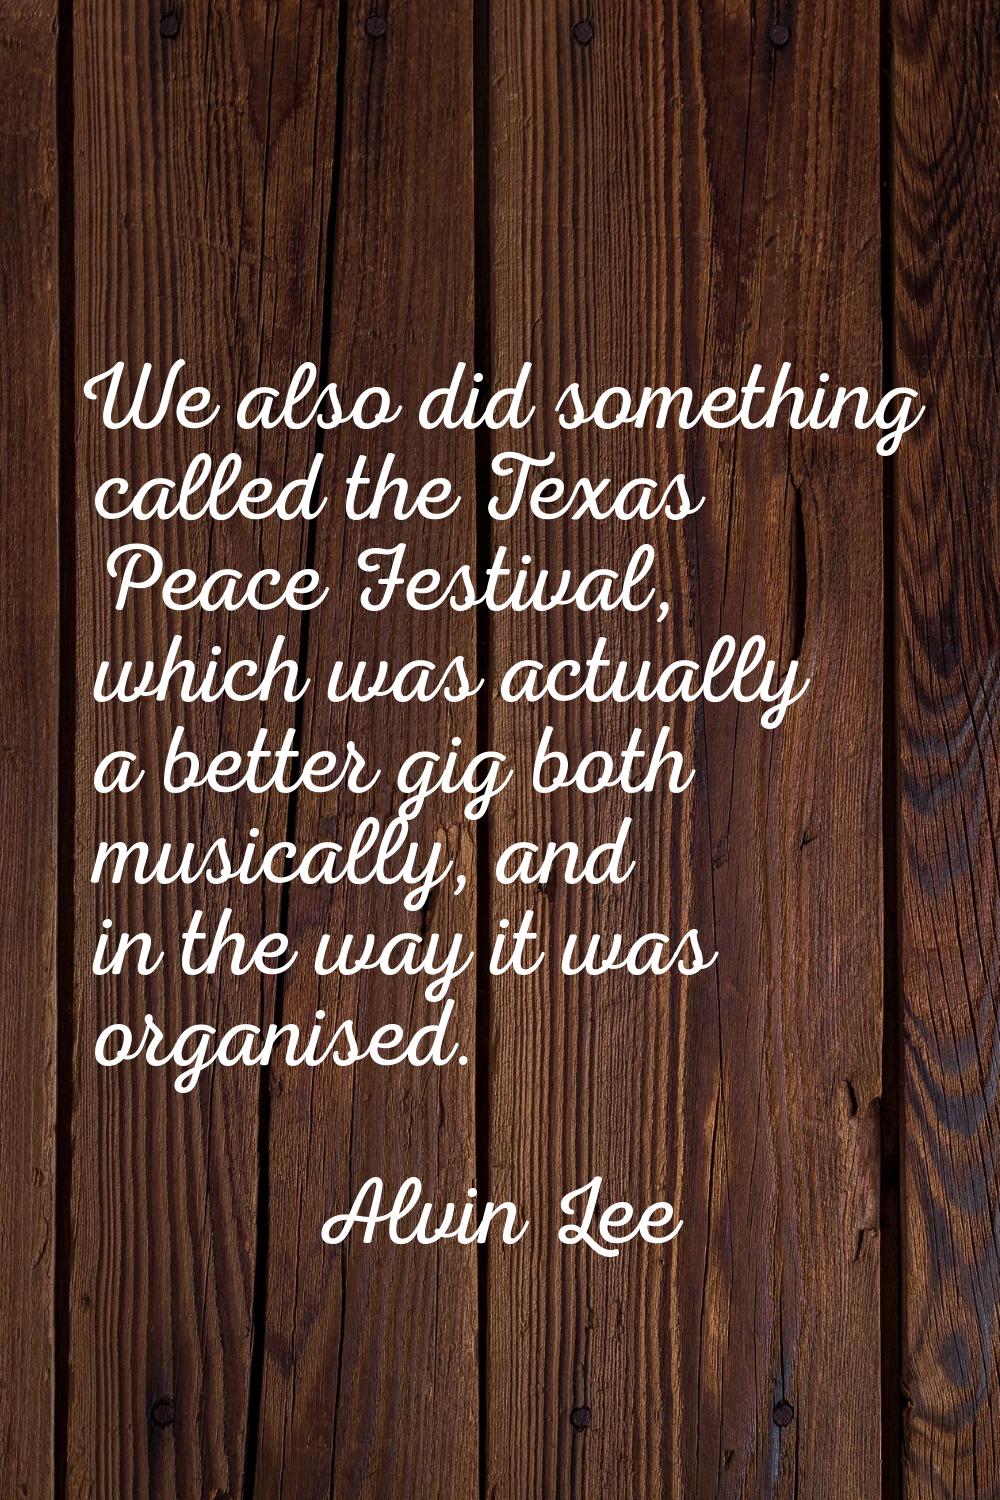 We also did something called the Texas Peace Festival, which was actually a better gig both musical